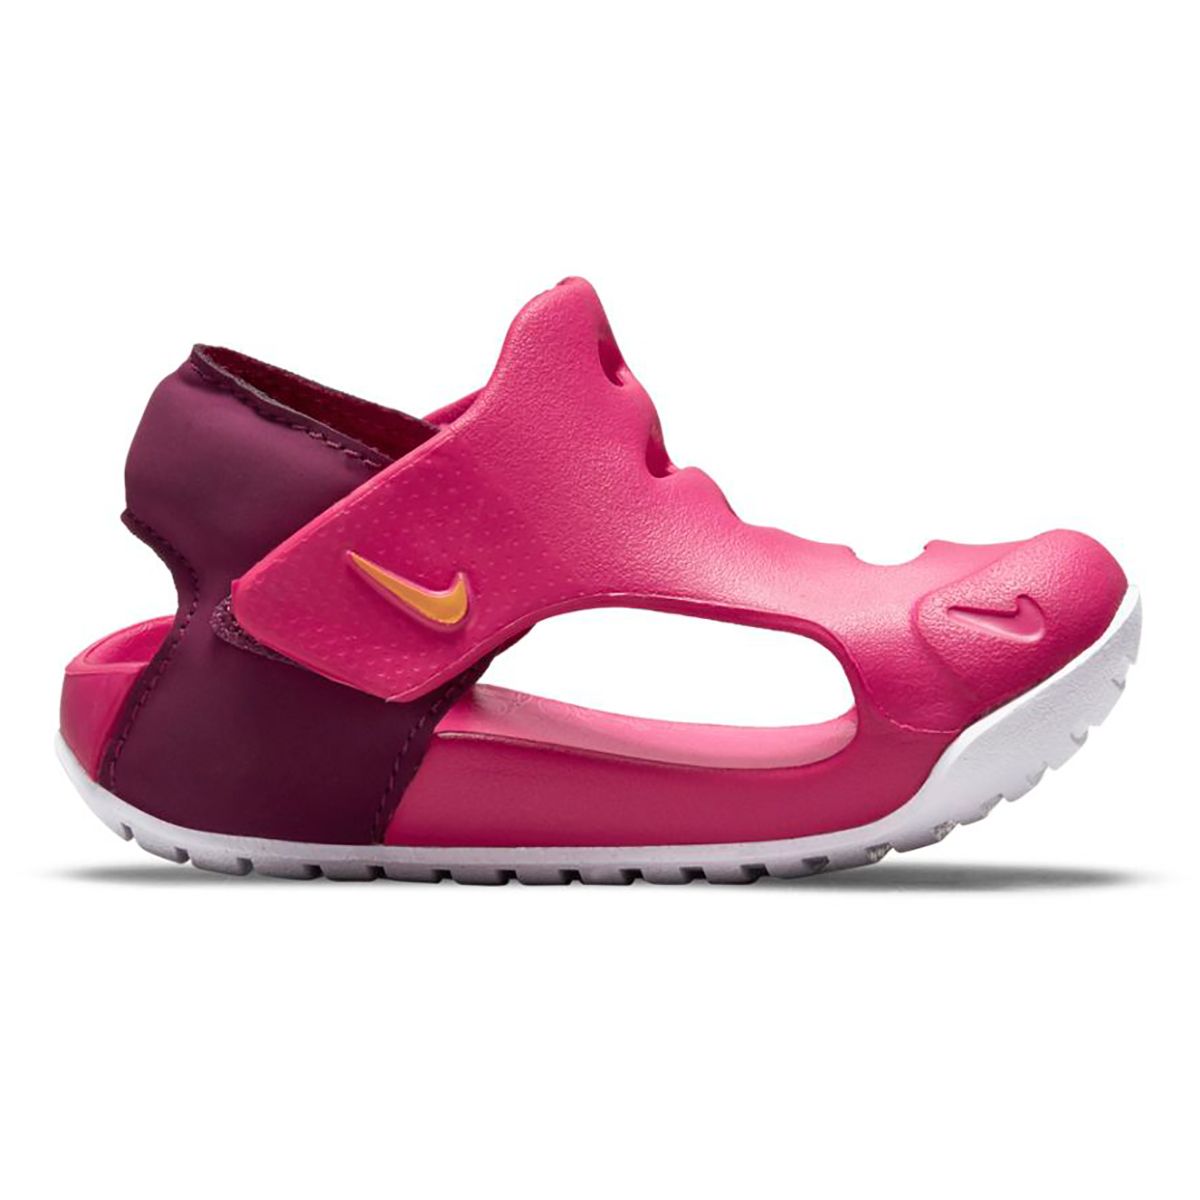 Nike Sunray Protect 3 DH9465-602 Toddler Sandals